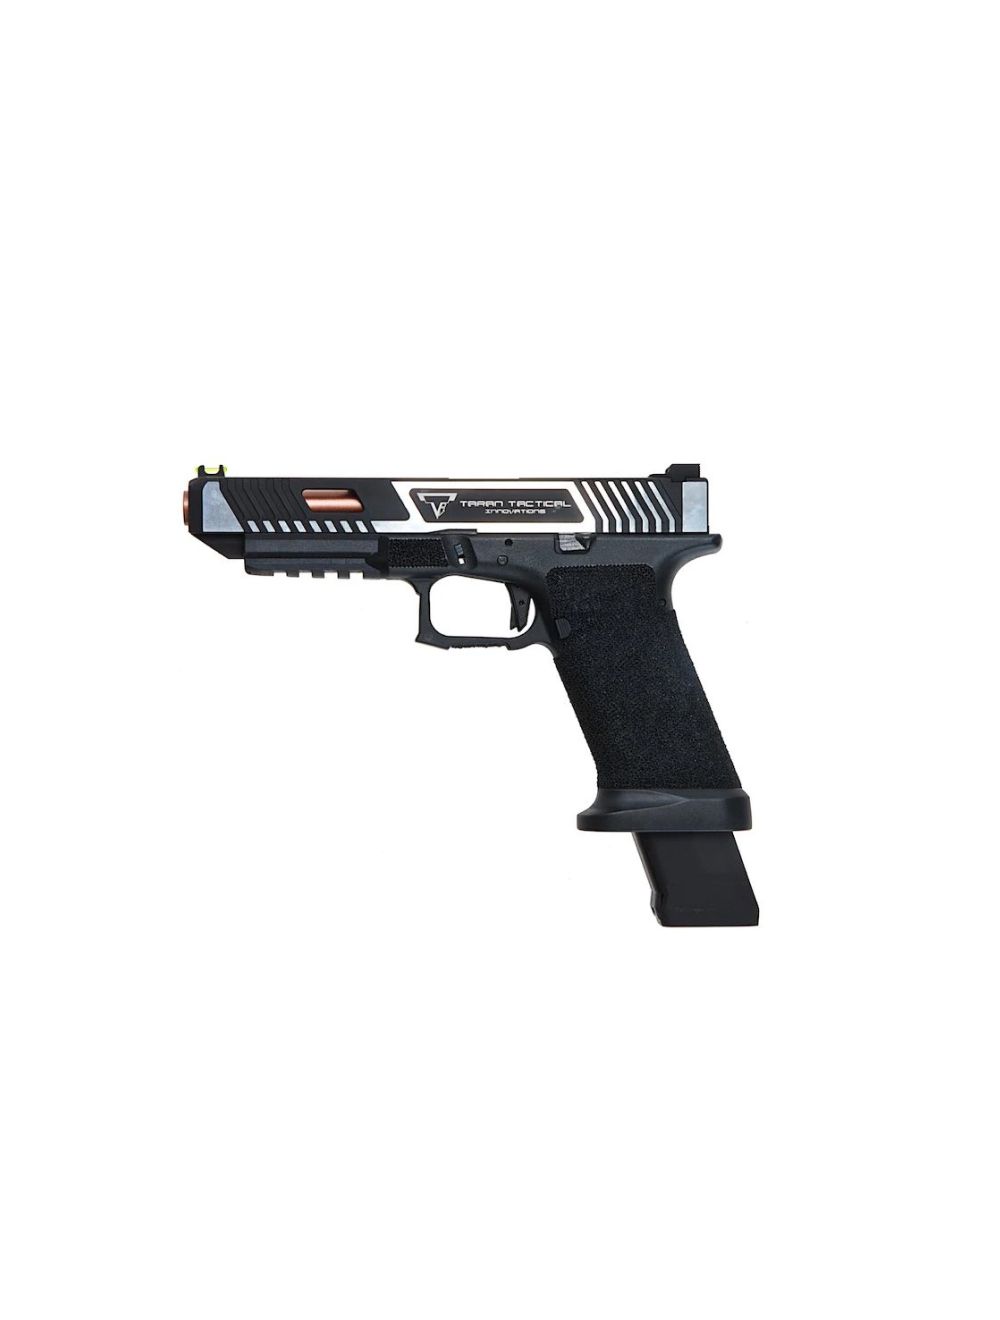 By　EMG　APS　(Gas　Dual　34　TTI　x　Master　Combat　Series　Frame　with　Custom　pistol　Slide　OMEGA　Tone　102070)